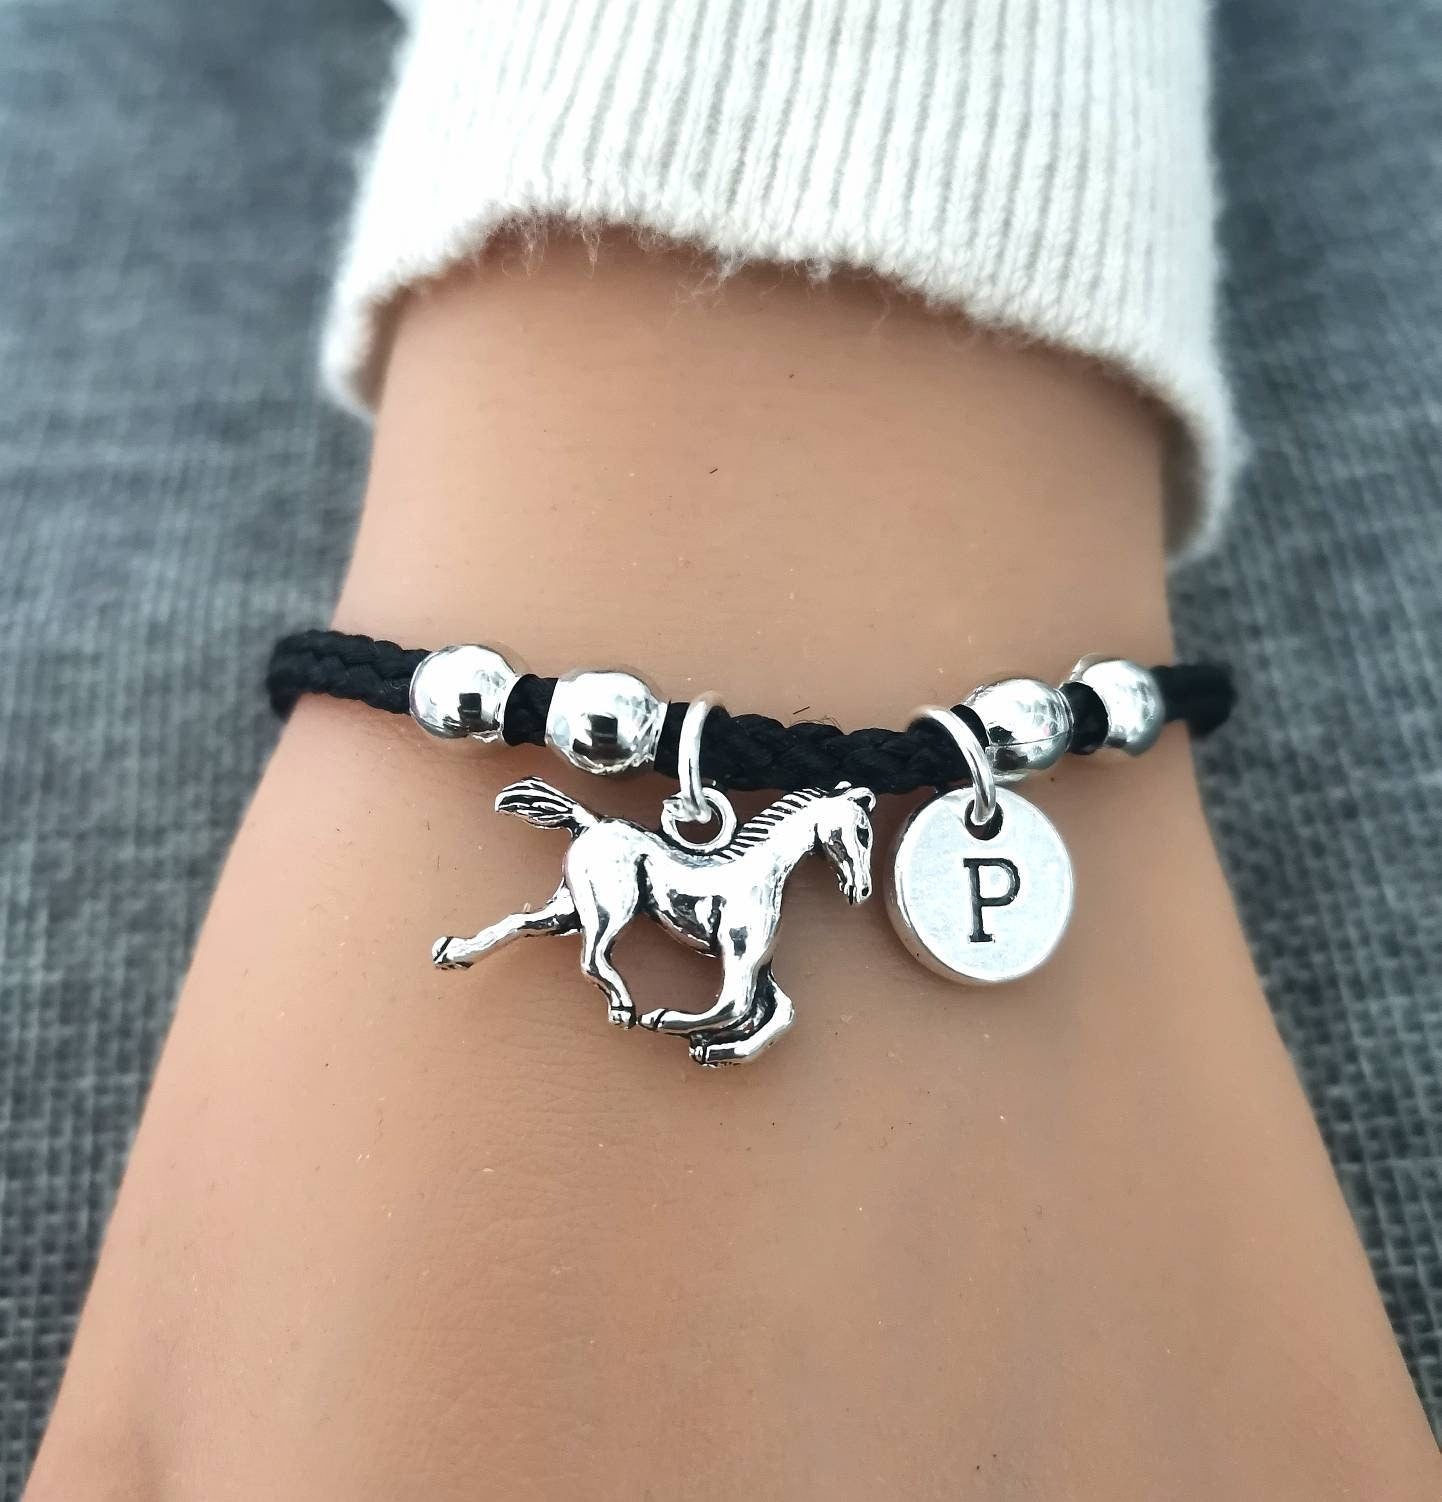 Horse bracelet, horse gift, horse gifts, gift horse, horse charm, horse lover, animal, horse gifts for her, horses, gift for horse lover